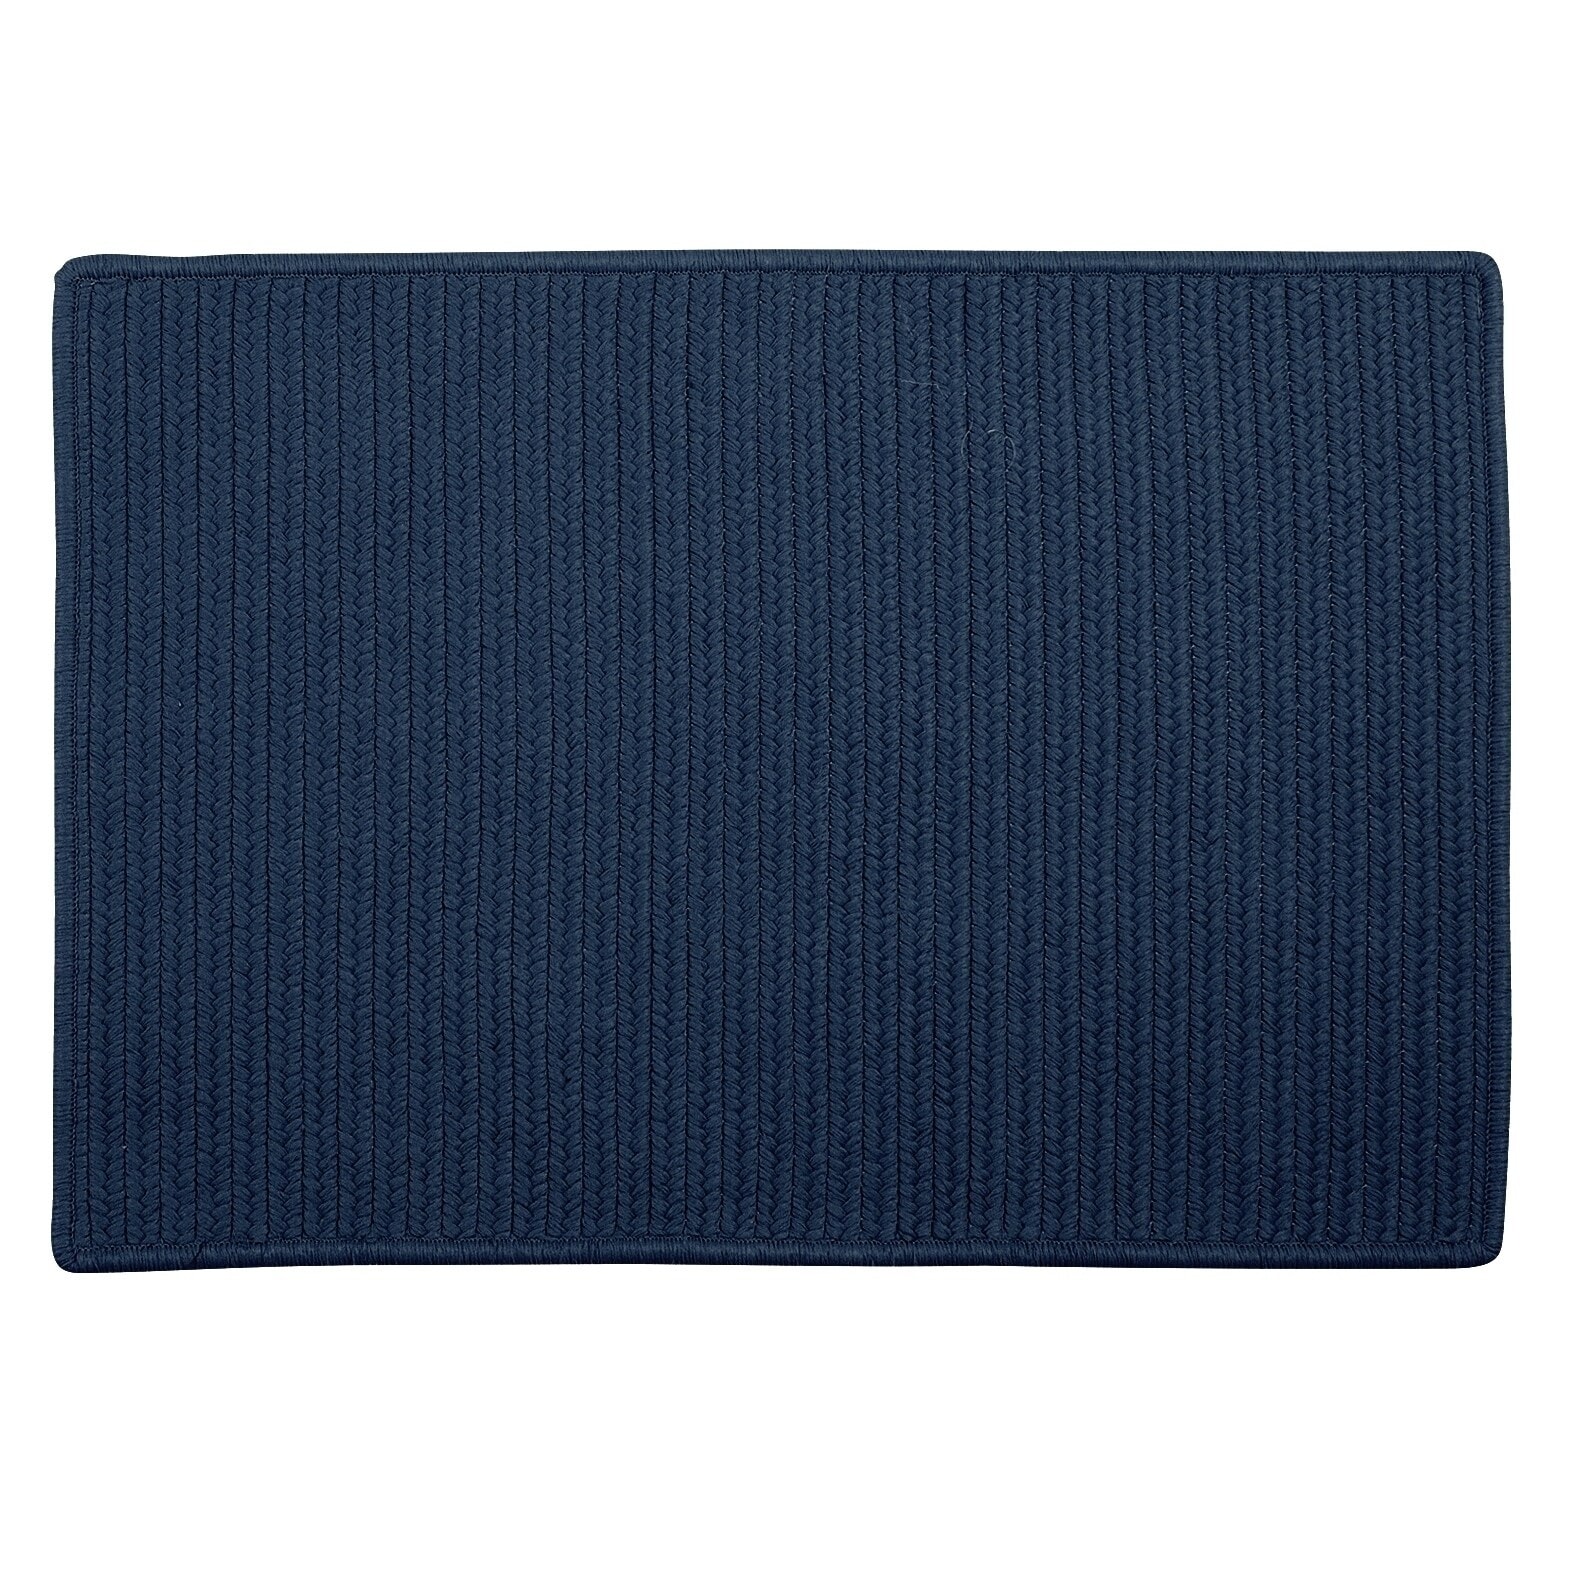 https://ak1.ostkcdn.com/images/products/is/images/direct/1dafba33a97ed91f689e4f5b8efcba278792e187/Low-profile-Solid-Color-Indoor-Outdoor-Reversible-Braided-Doormat.jpg